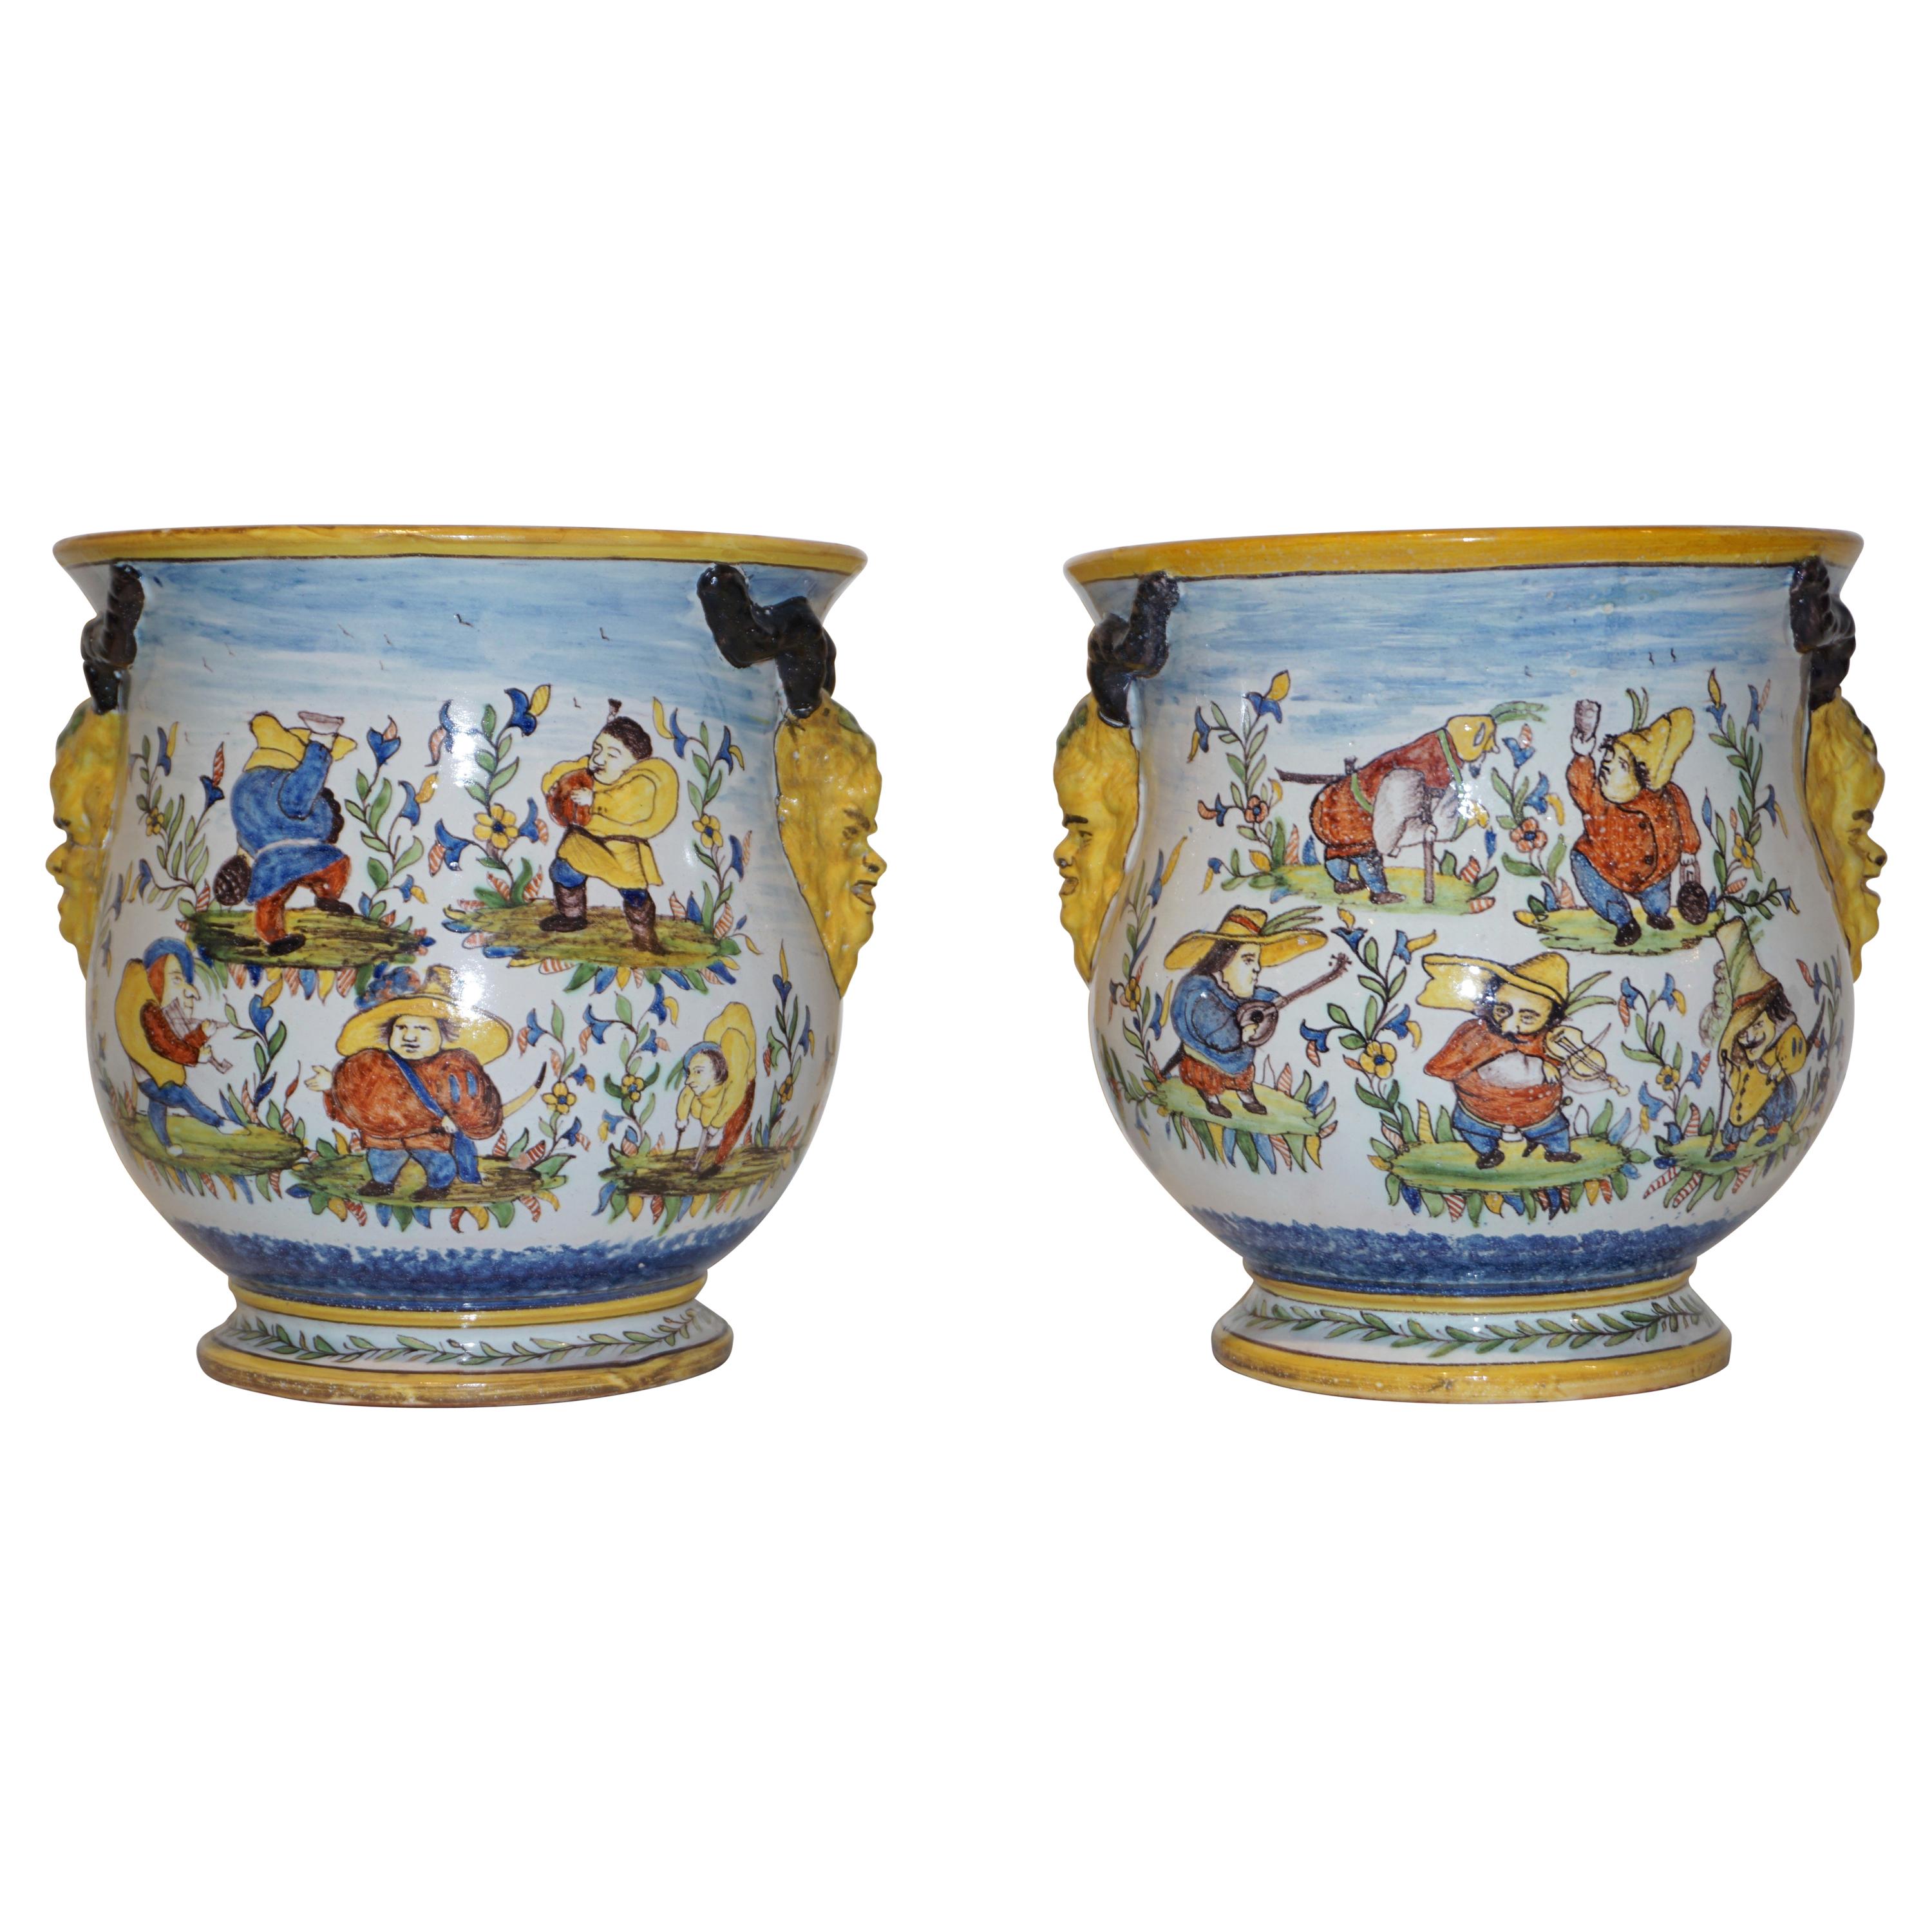 1870s French Pair of Yellow Blue Green Red White Majolica Jardinières / Planters For Sale